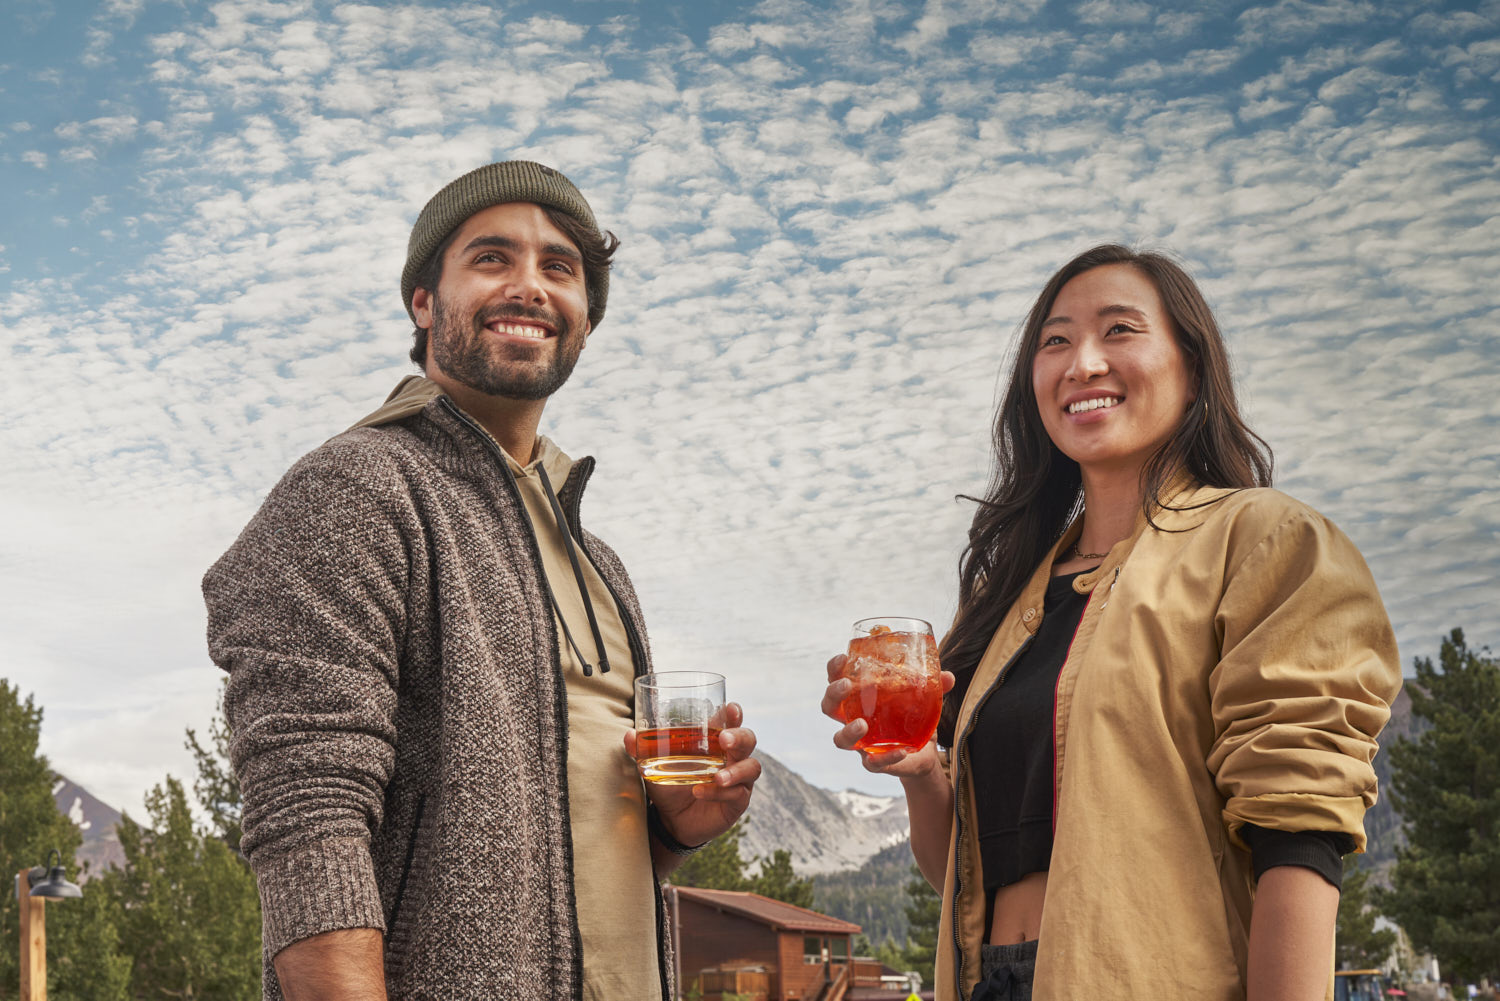 A man and a lady savoring drinks beneath a beautiful sky, relishing the moment.